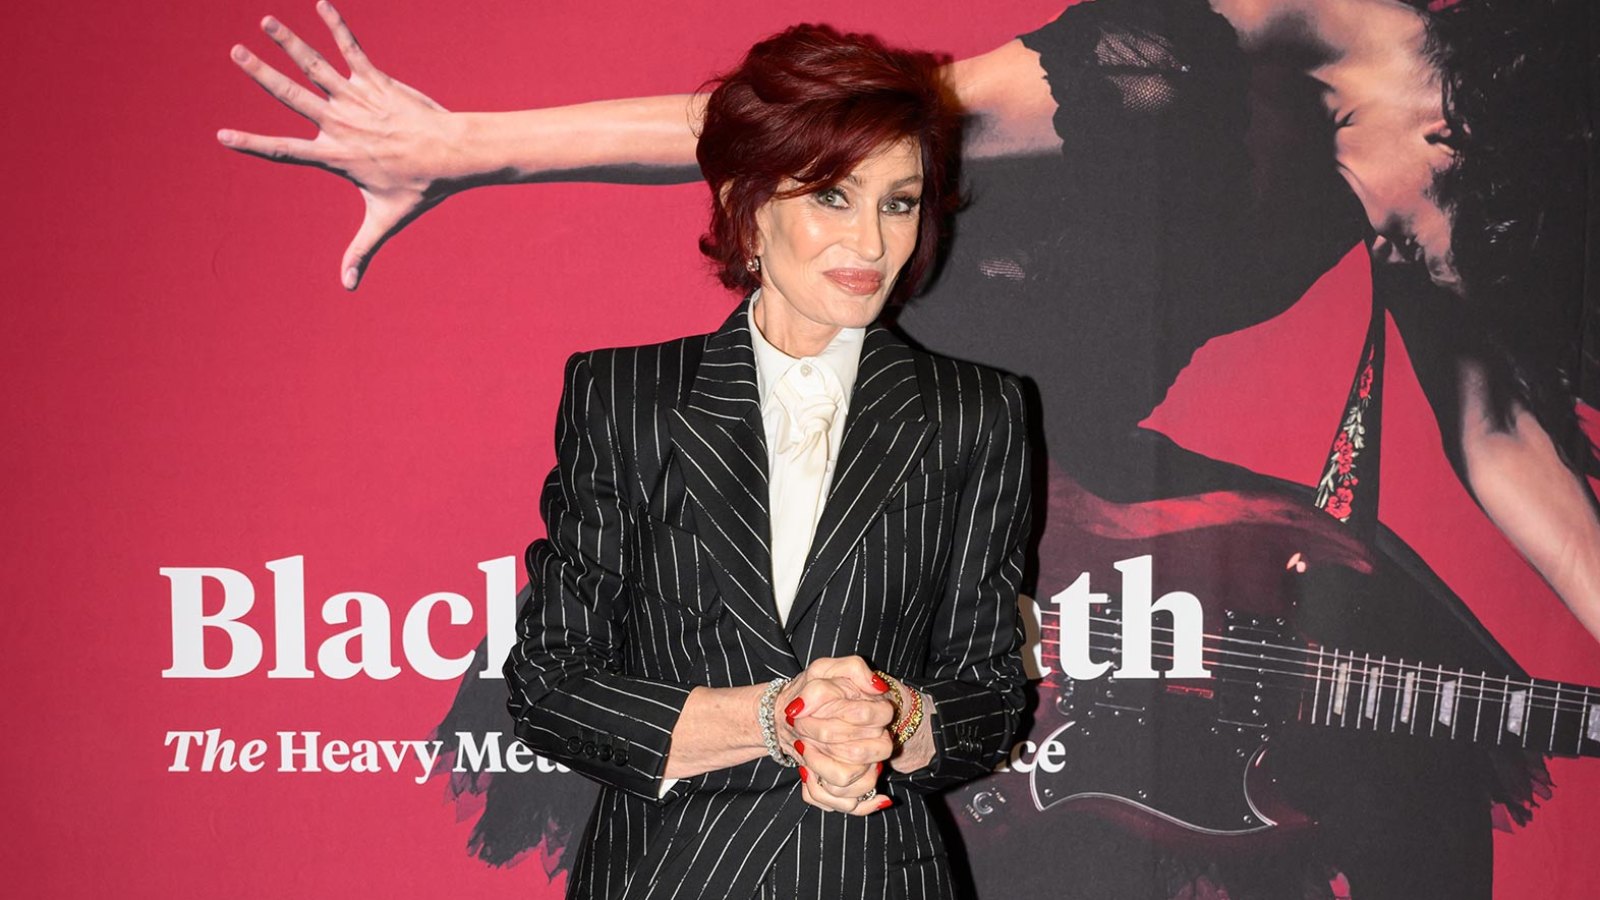 Sharon Osbourne Reflects on Her 3rd Facelift in 2021 The Worst Thing I Ever Did